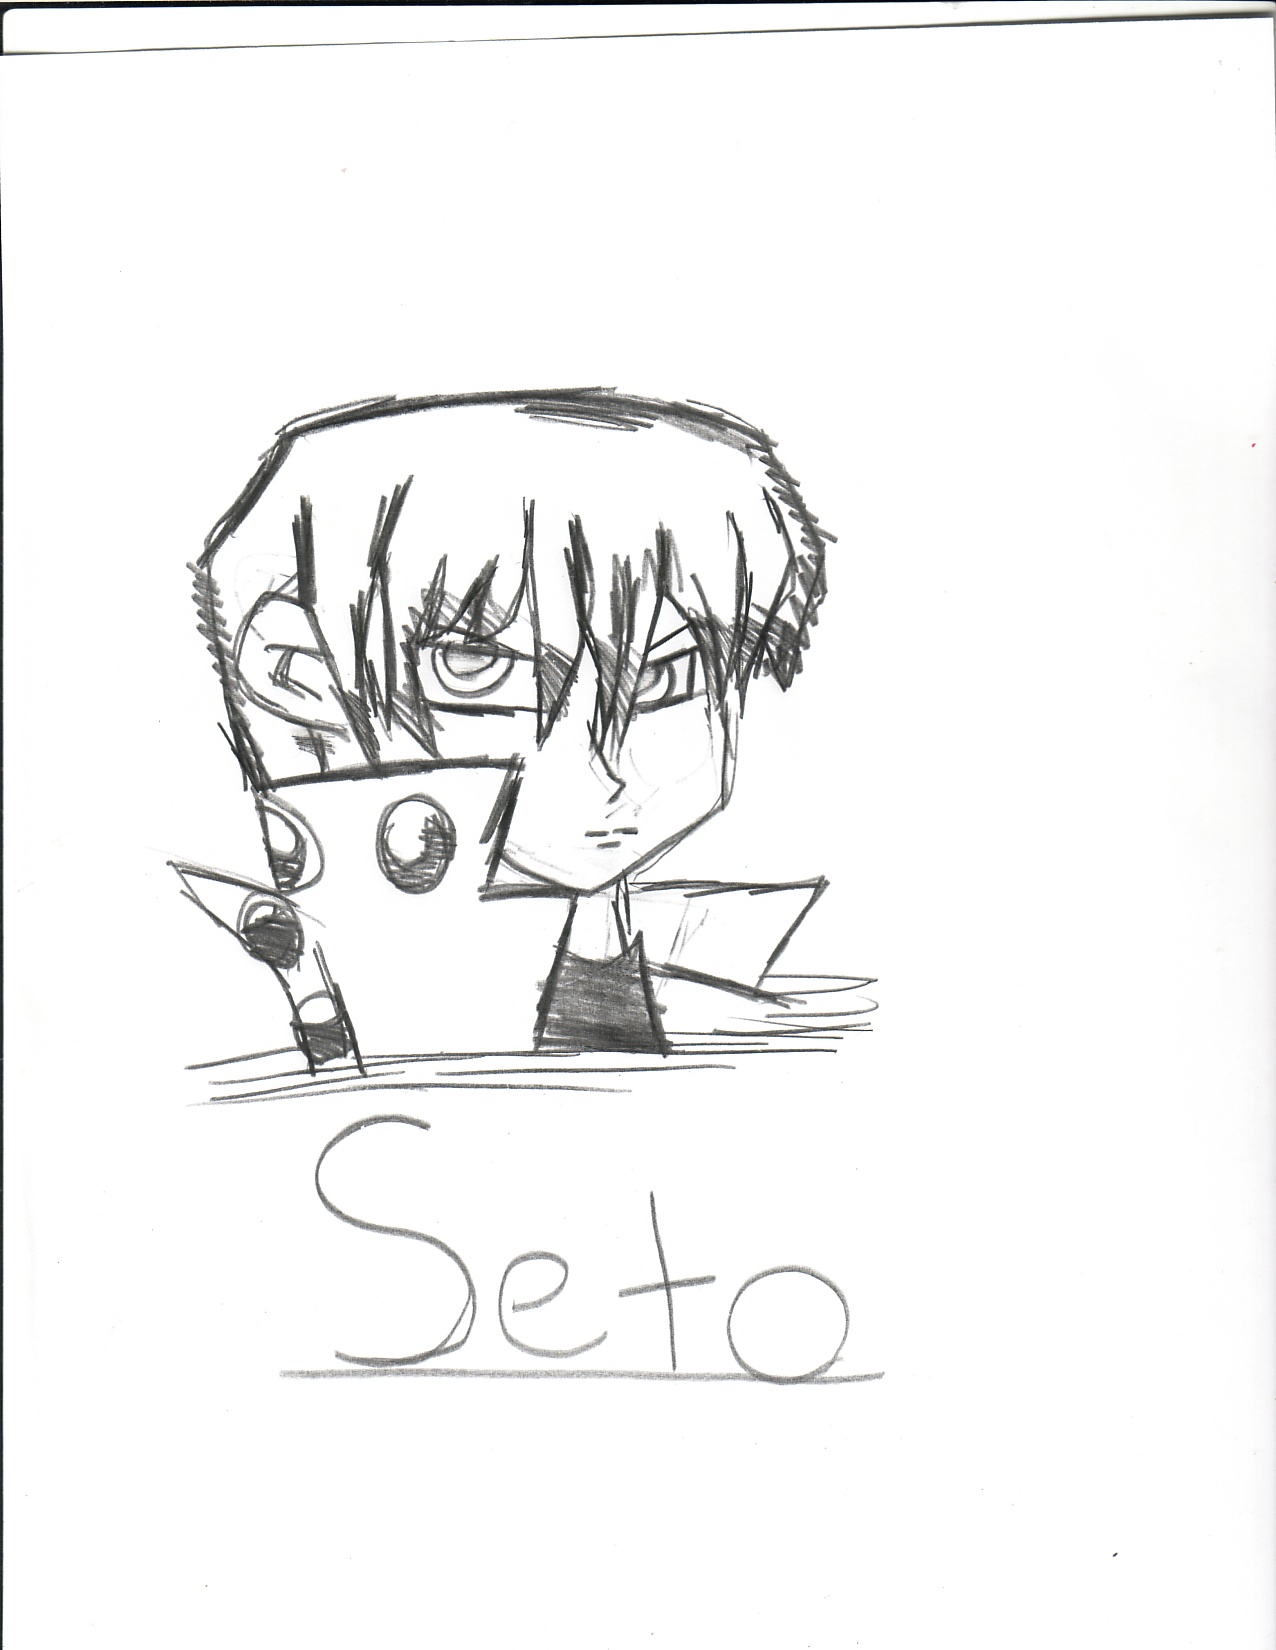 Seto by Raylover345678